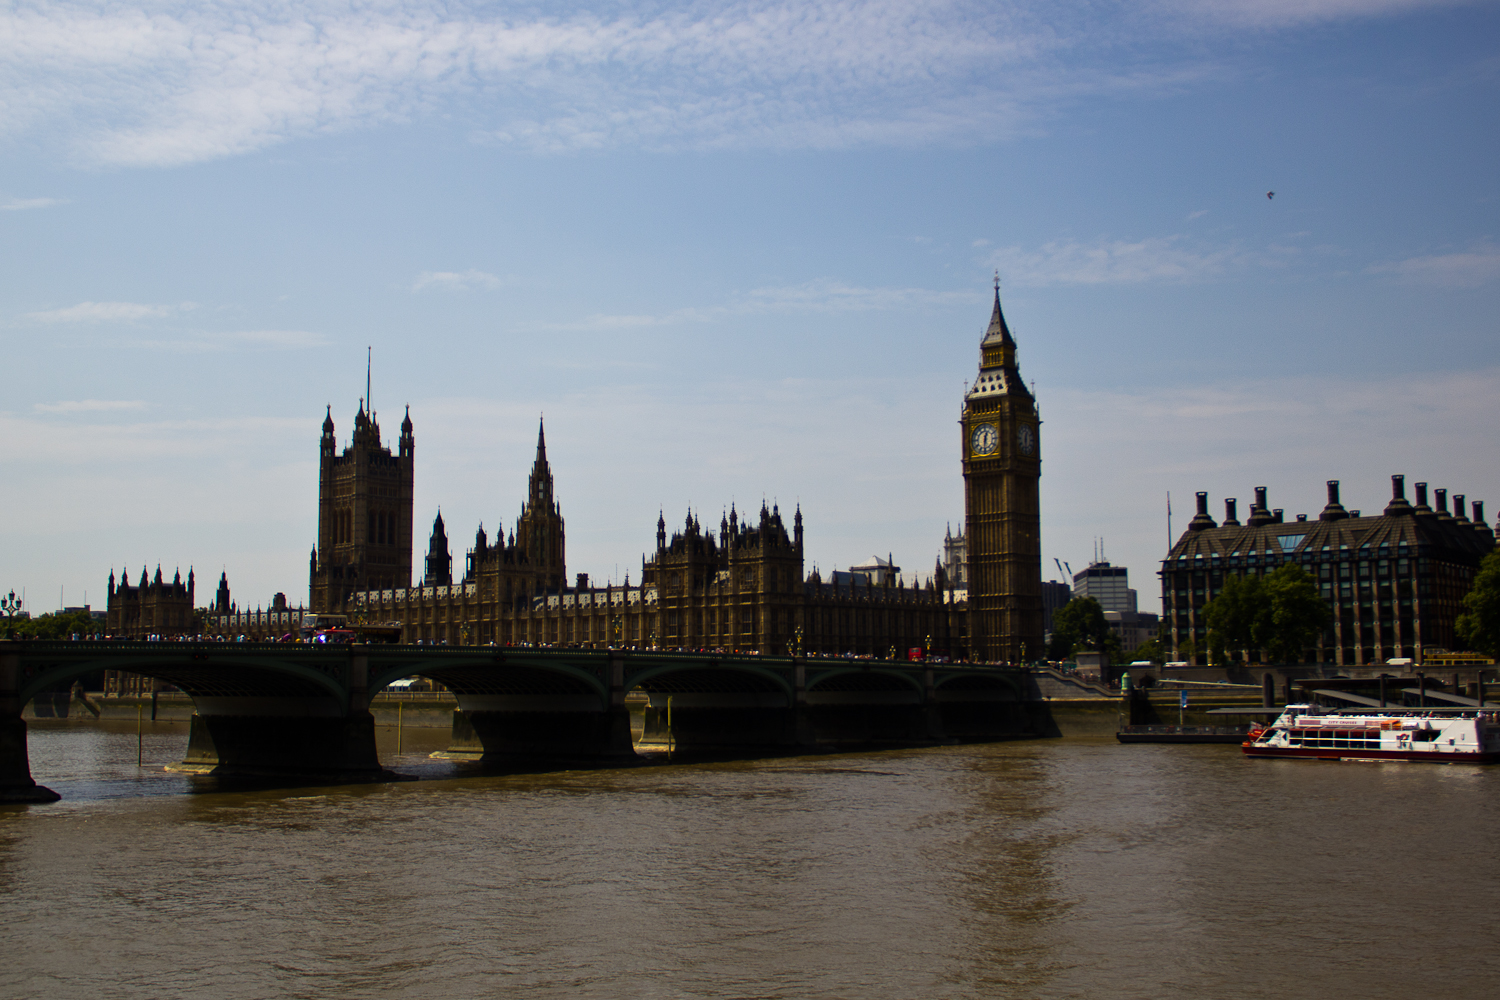 The Houses of Parliament from Across the Thames River